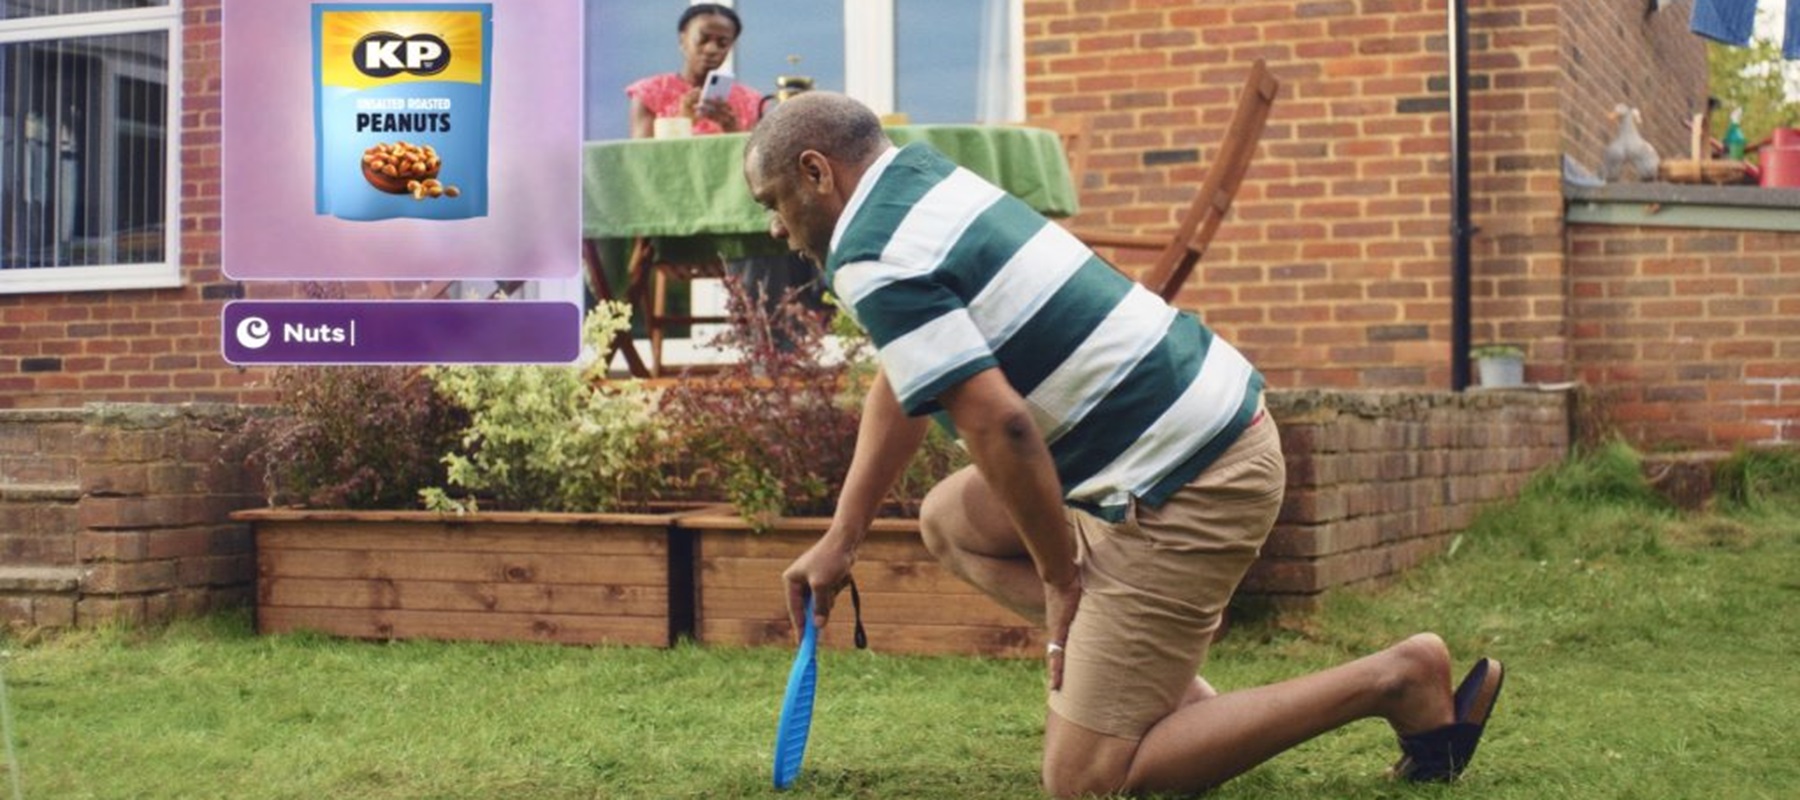 Online grocery retailer Ocado invites shoppers to let ‘Summer Come to You’ in new campaign